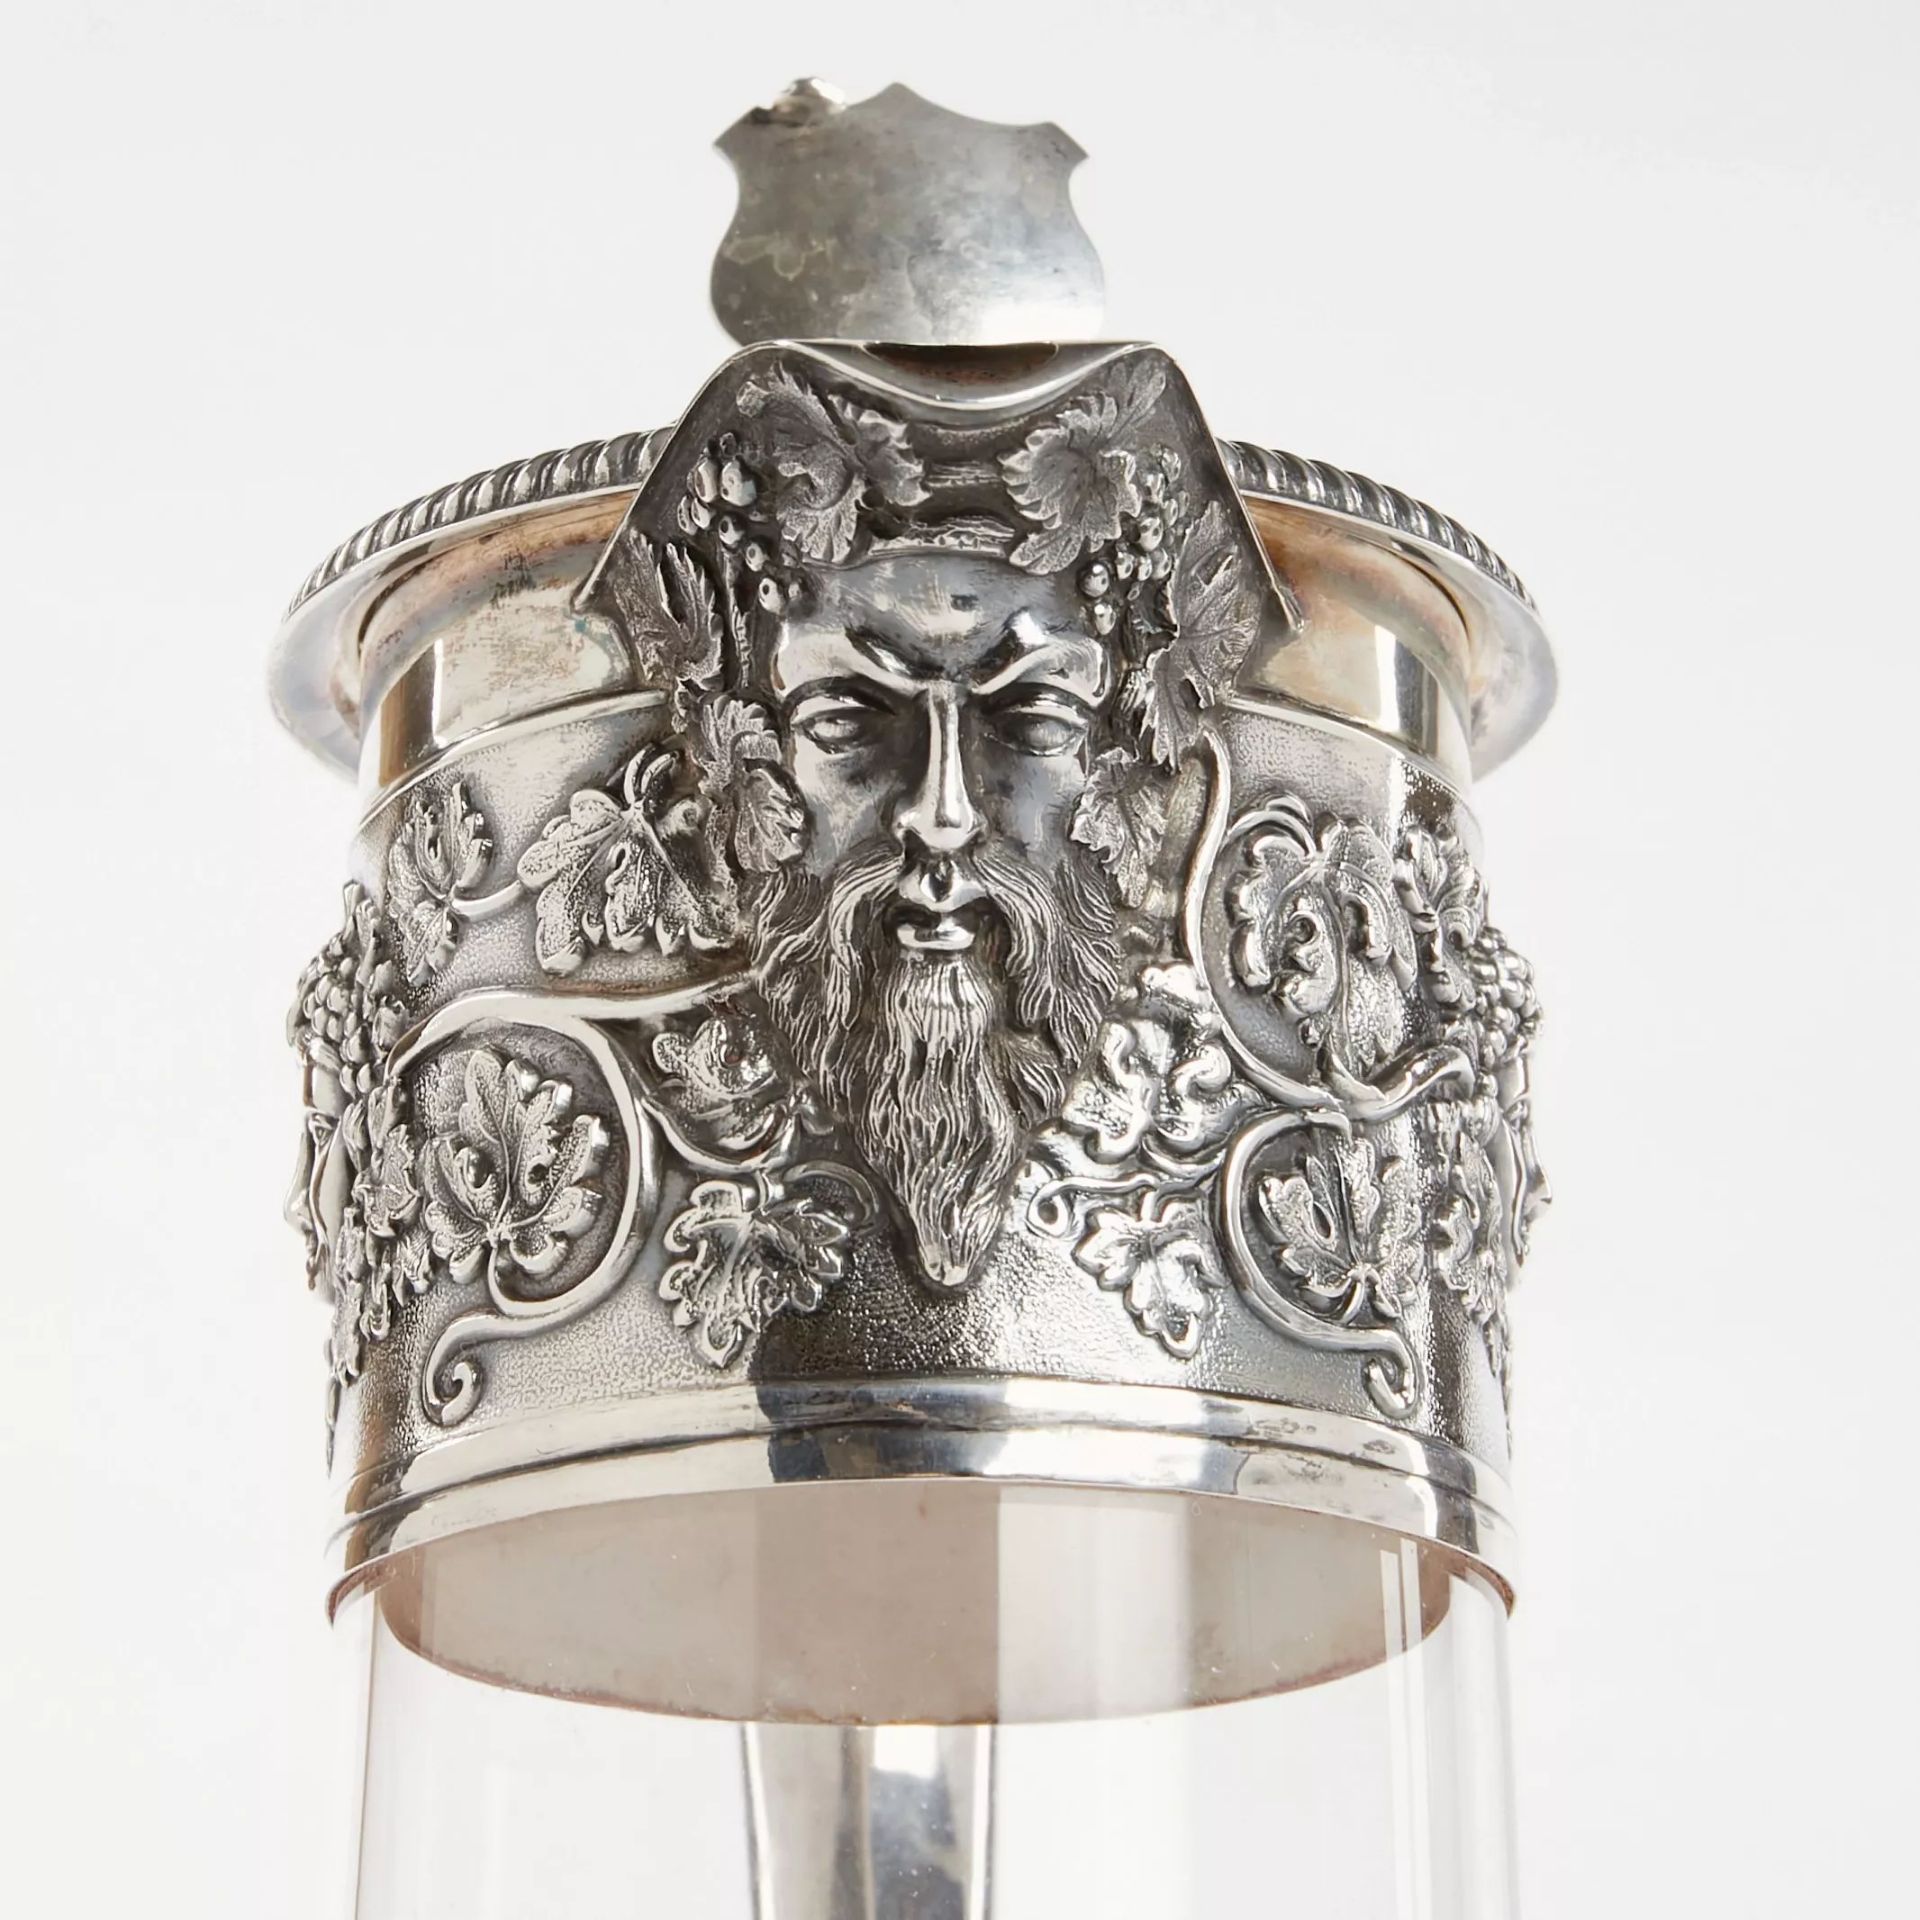 Silver Wine Jug with Glass Horace Woodward & Hugh Taylor, London 1893. - Image 5 of 7